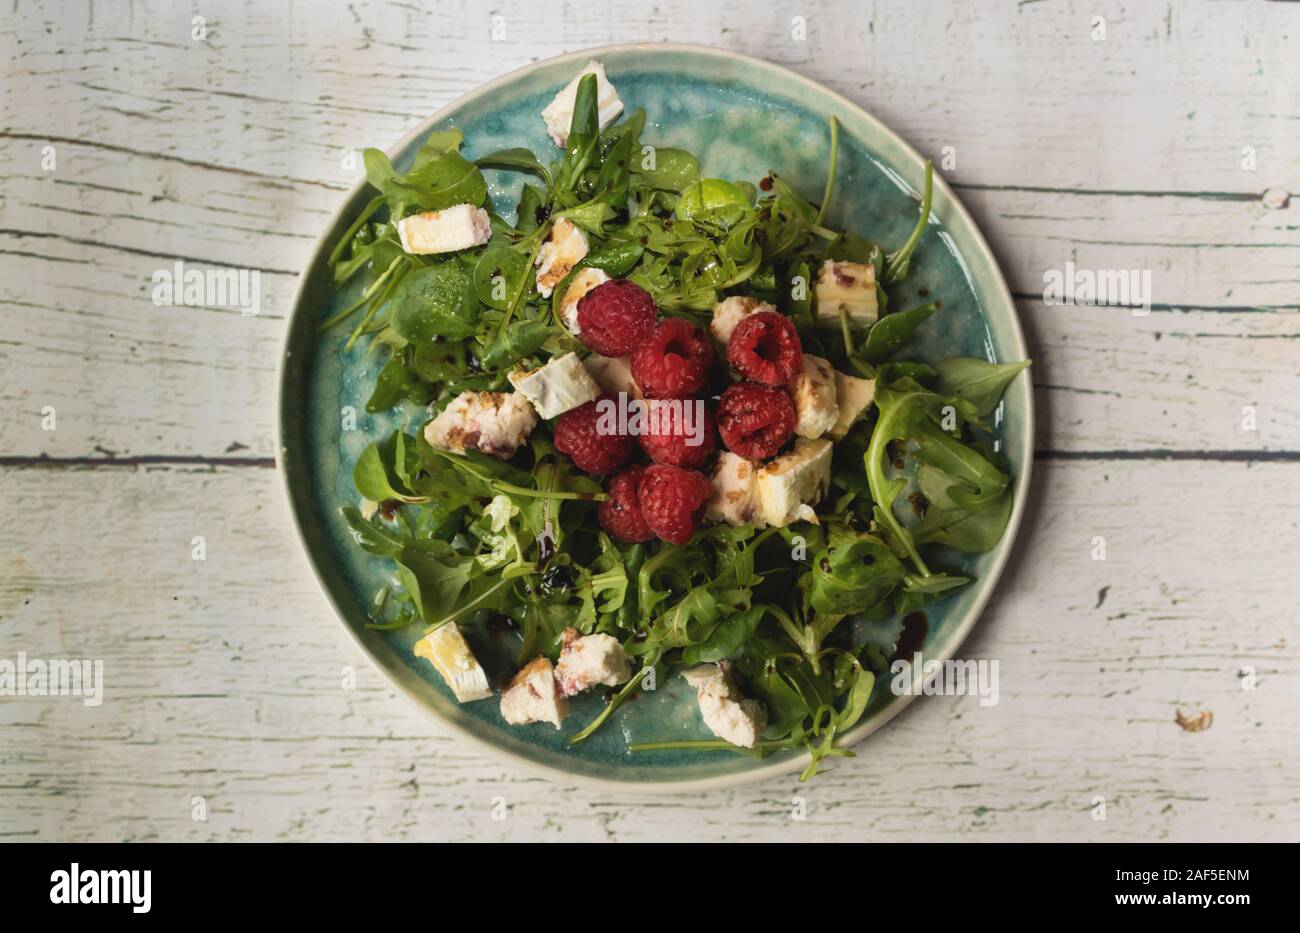 Wild vegetable salad with raspberries and goat cheese, olive oil and modena vinegar, on a white wooden background Stock Photo